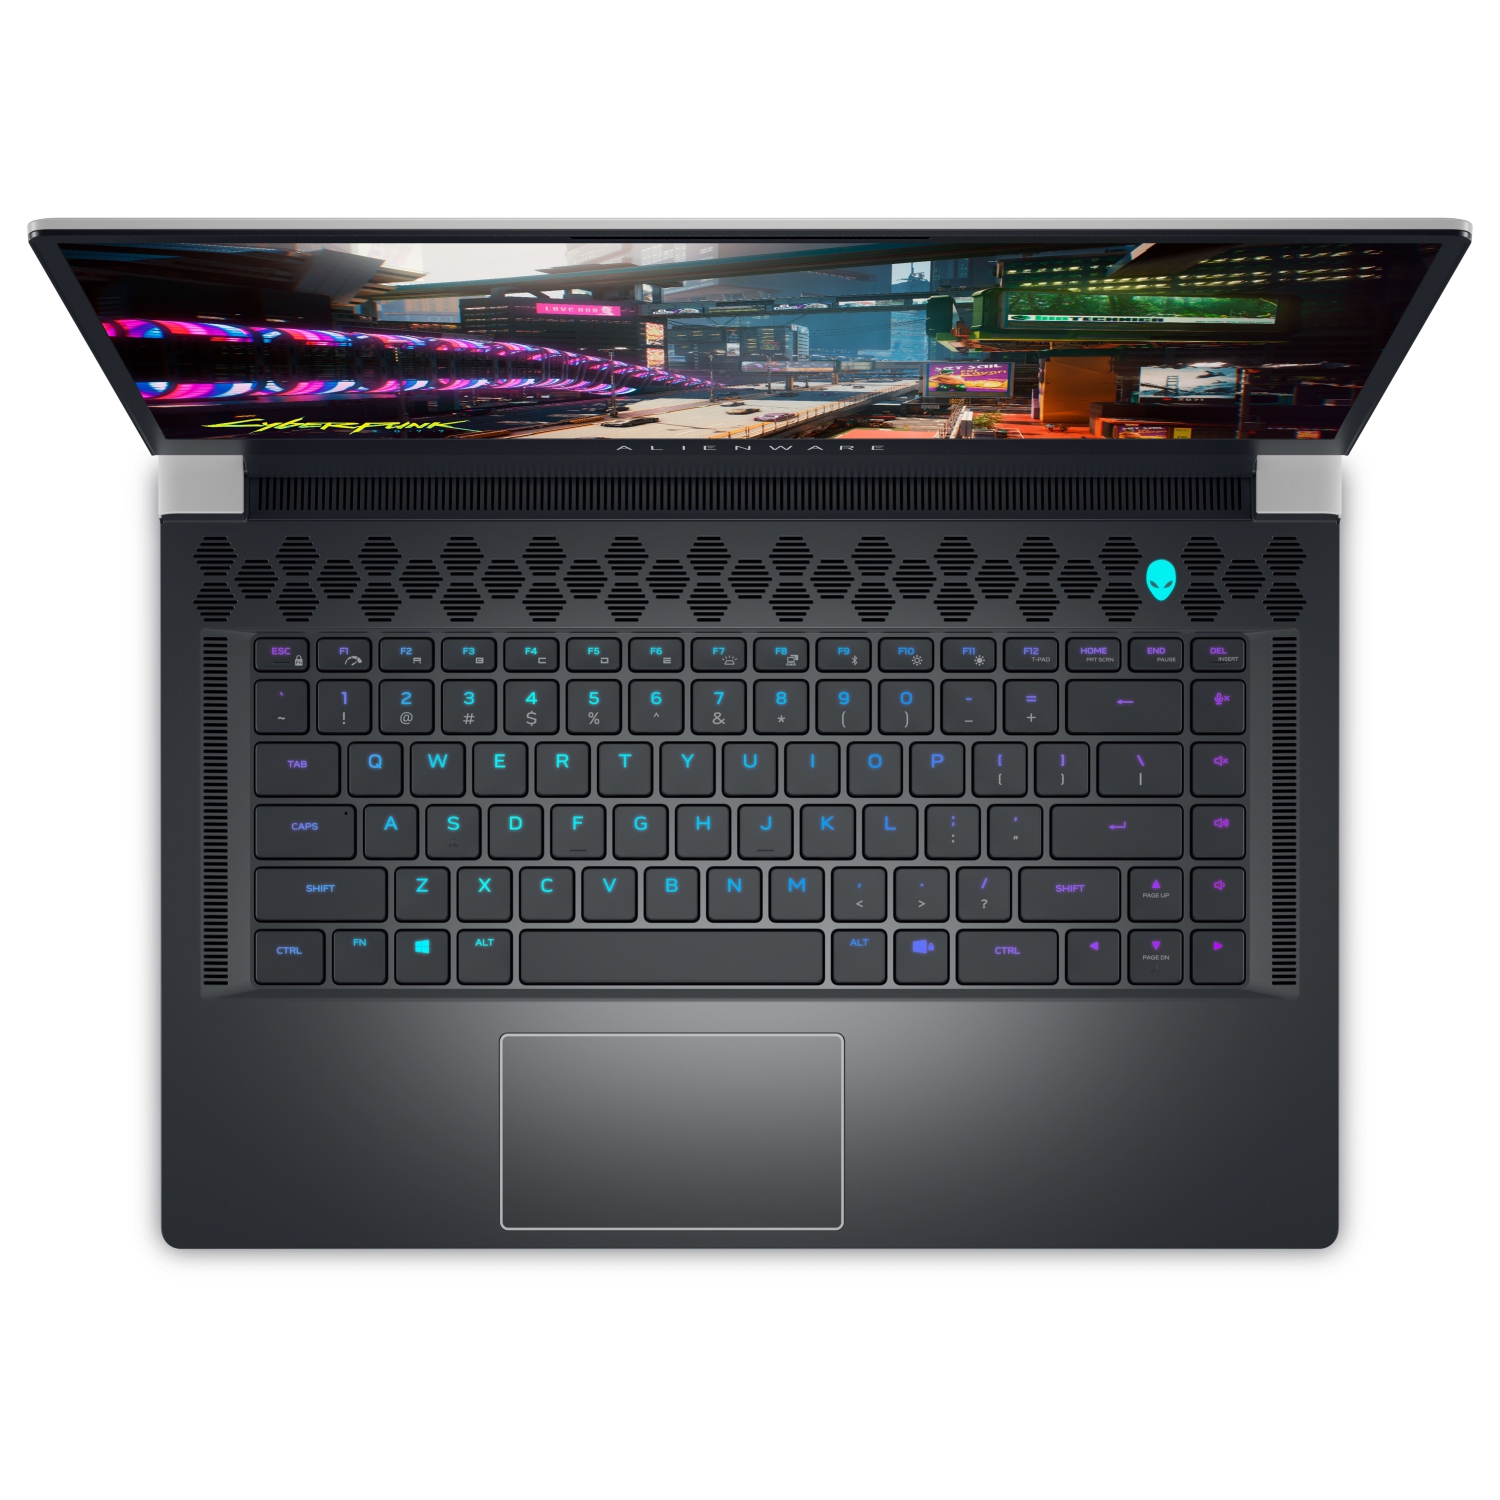 Refurbished (Excellent) – Dell Alienware X15 R2 Gaming Laptop (2022) | 15.6" FHD | Core i9 - 1TB SSD - 32GB RAM - RTX 3080 | 14 Cores @ 5 GHz - 12th Gen CPU - 10GB GDDR6X